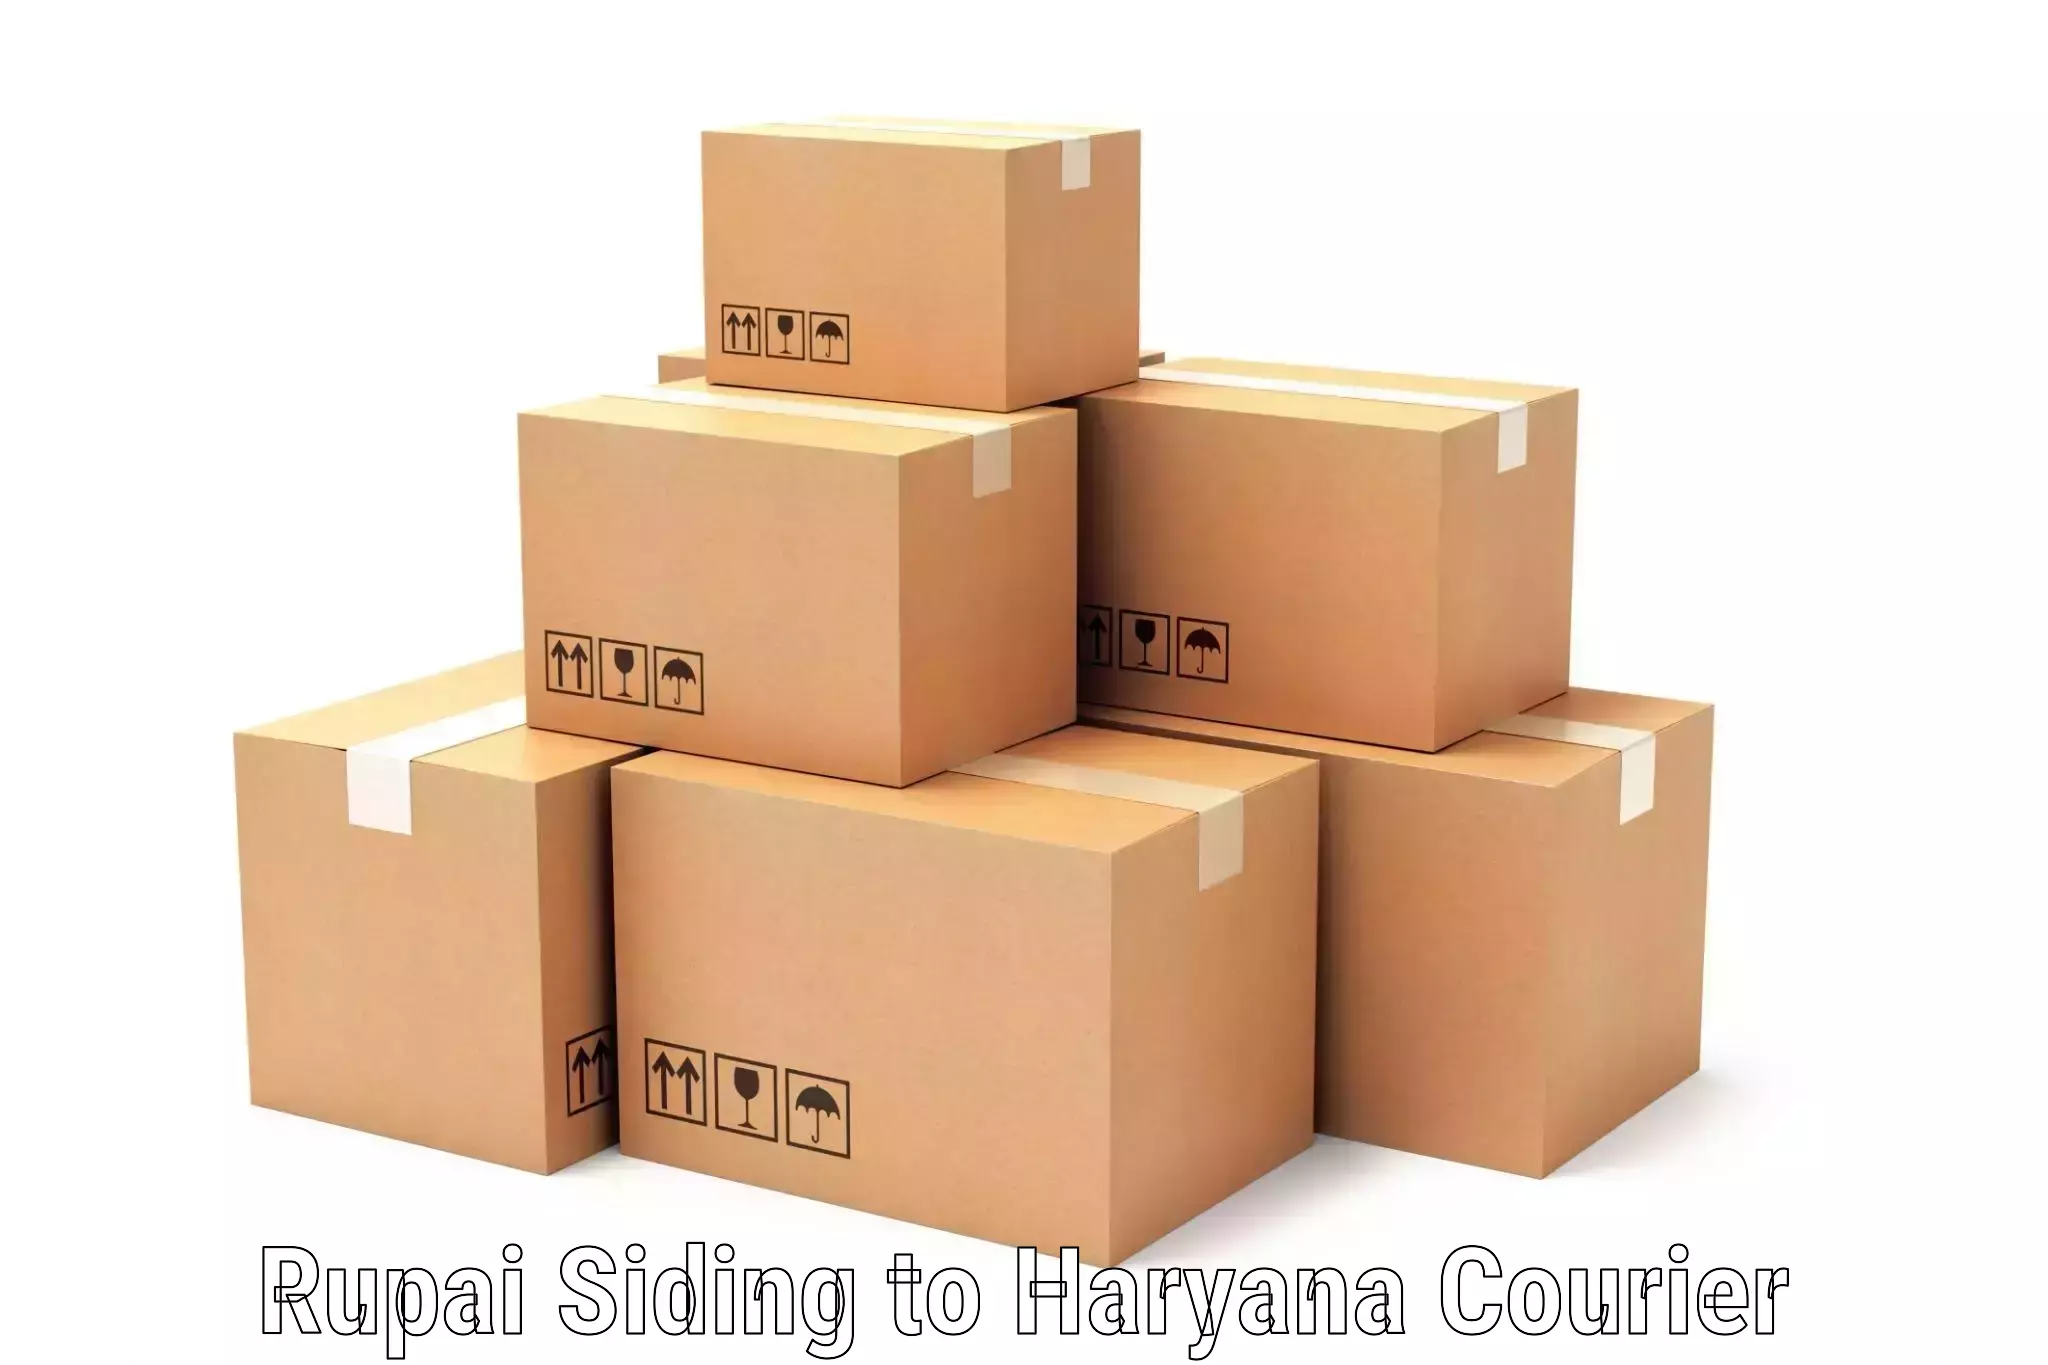 Express delivery network Rupai Siding to Haryana